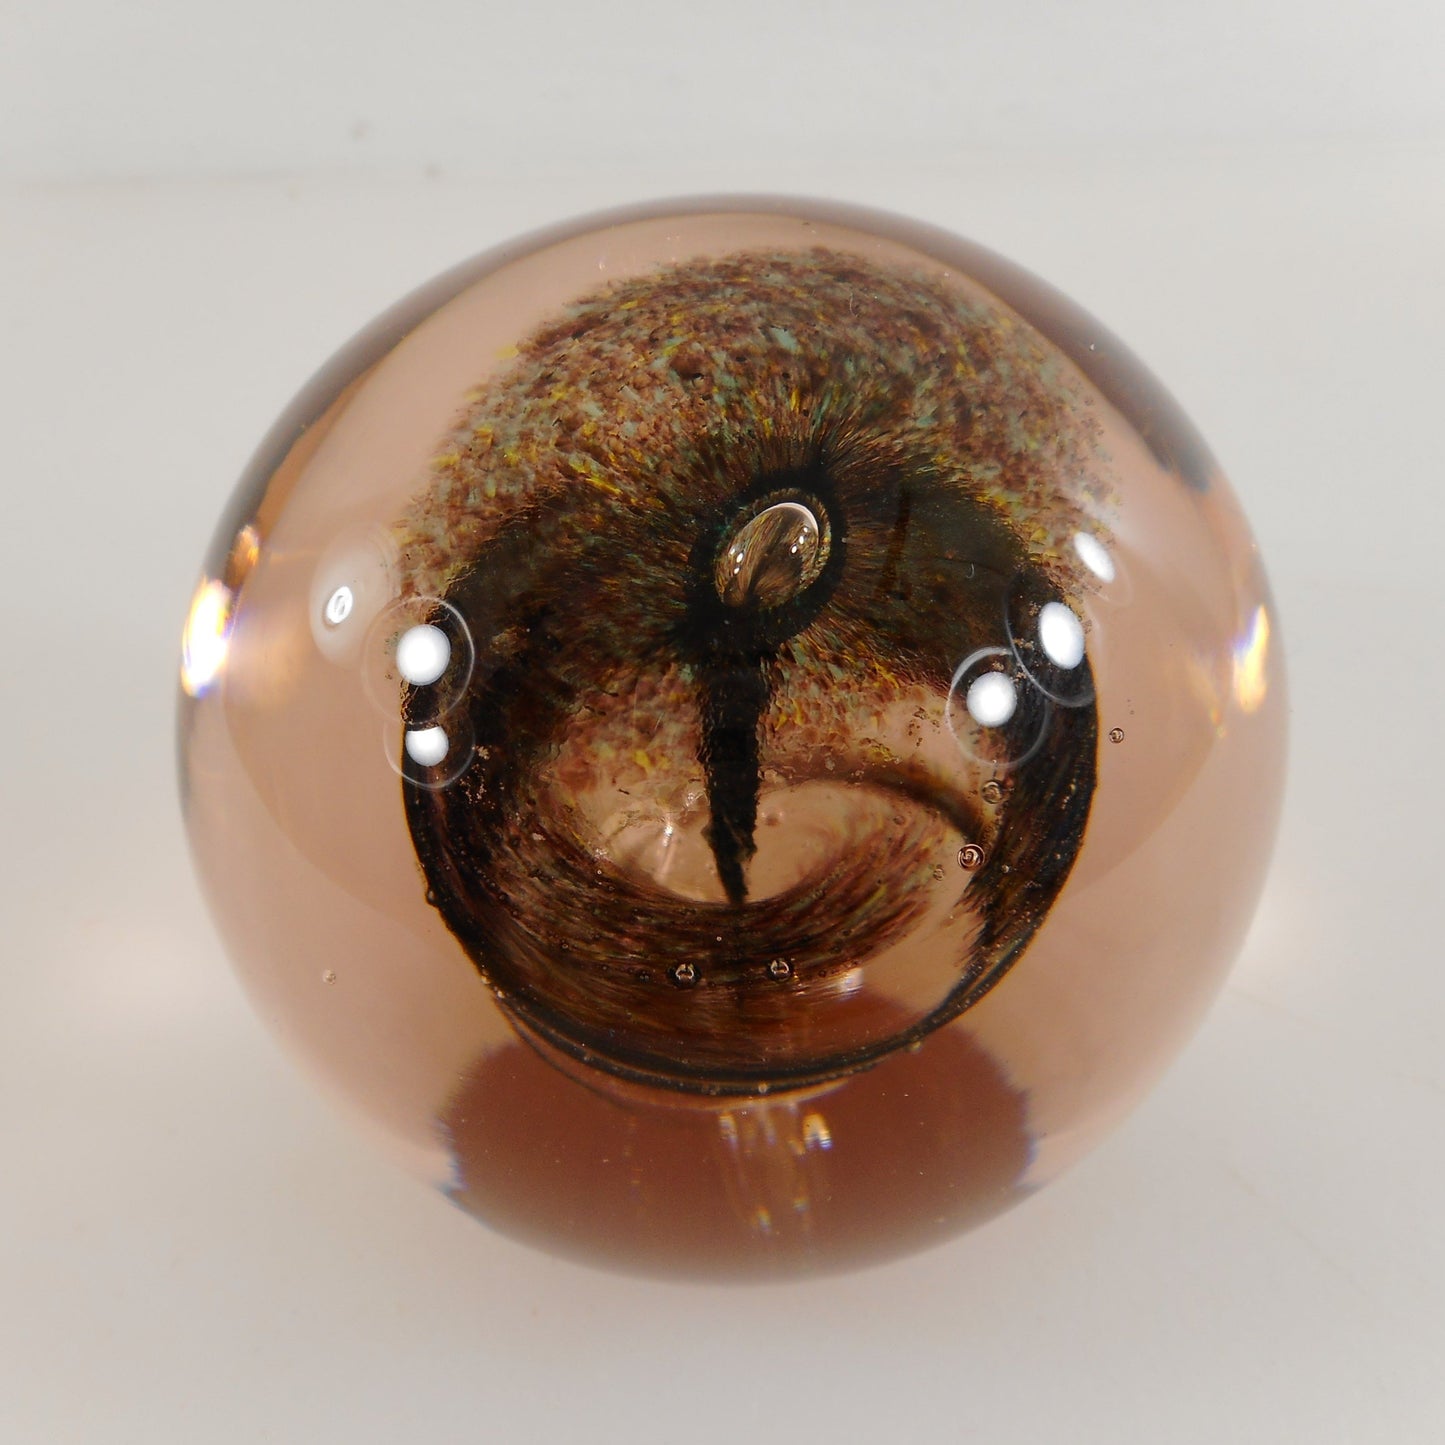  Hank 1989 Signed Art Glass Paperweight Multi-color Swirl Black - top view